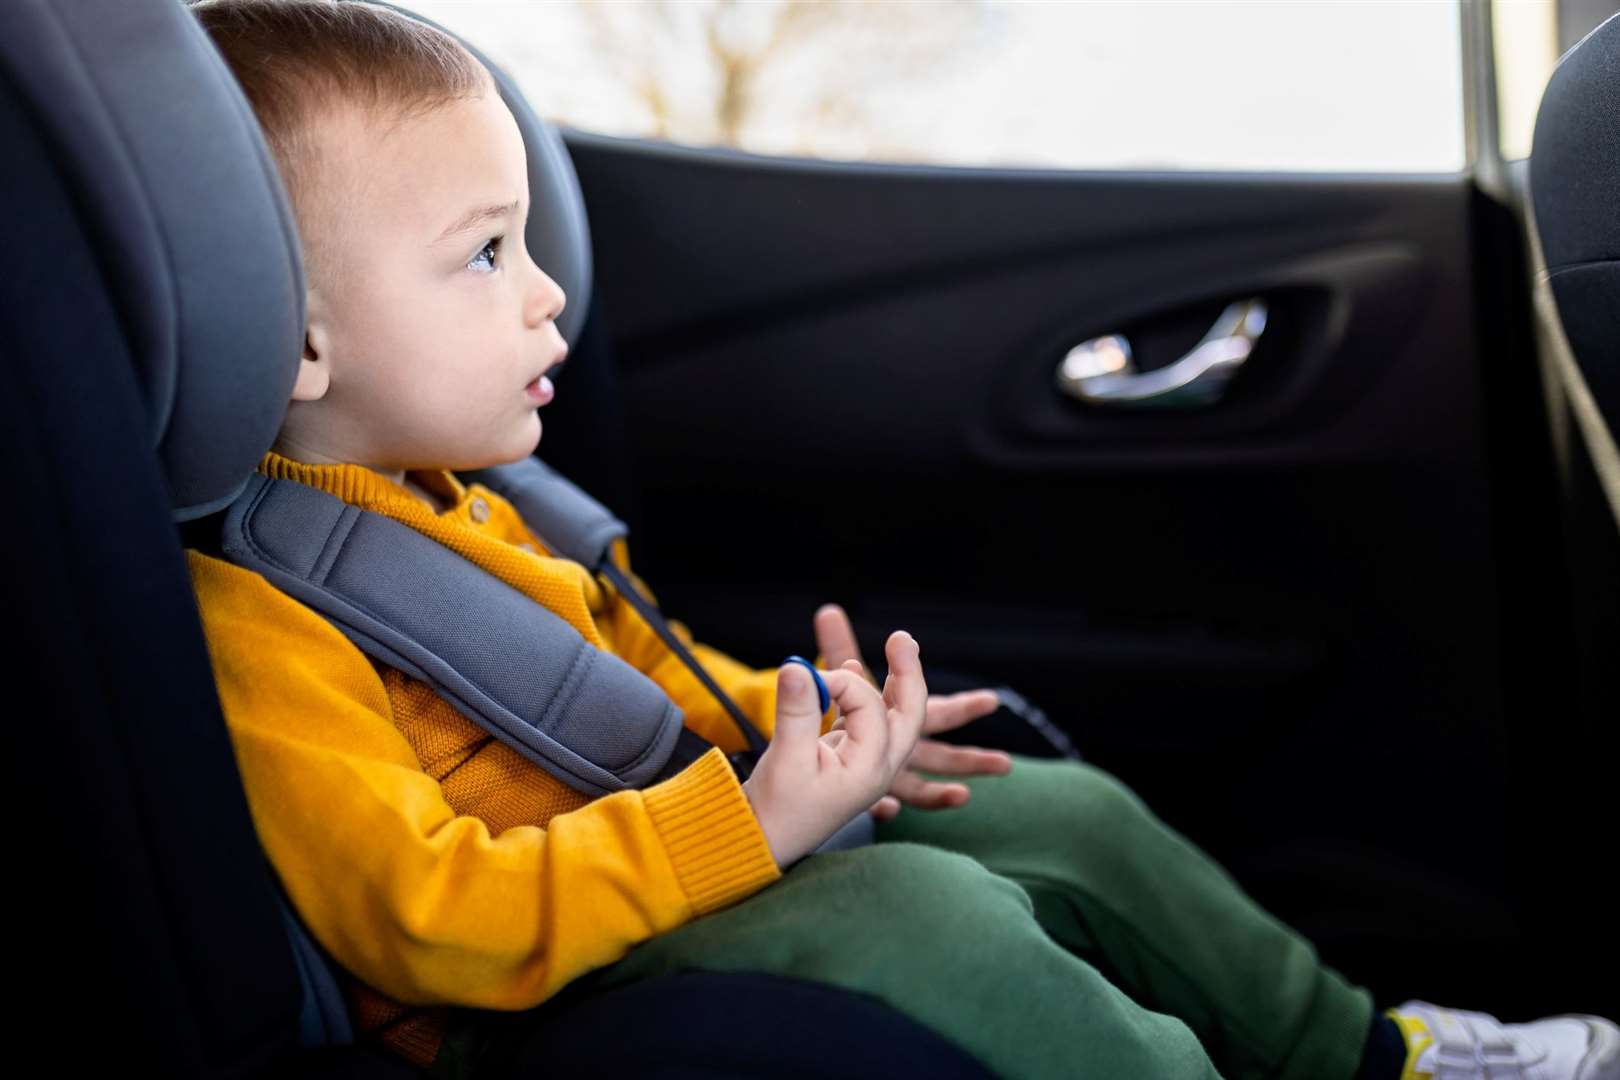 Families are being asked to check the make and model of their car seat. Image: iStock/zoff-photo.